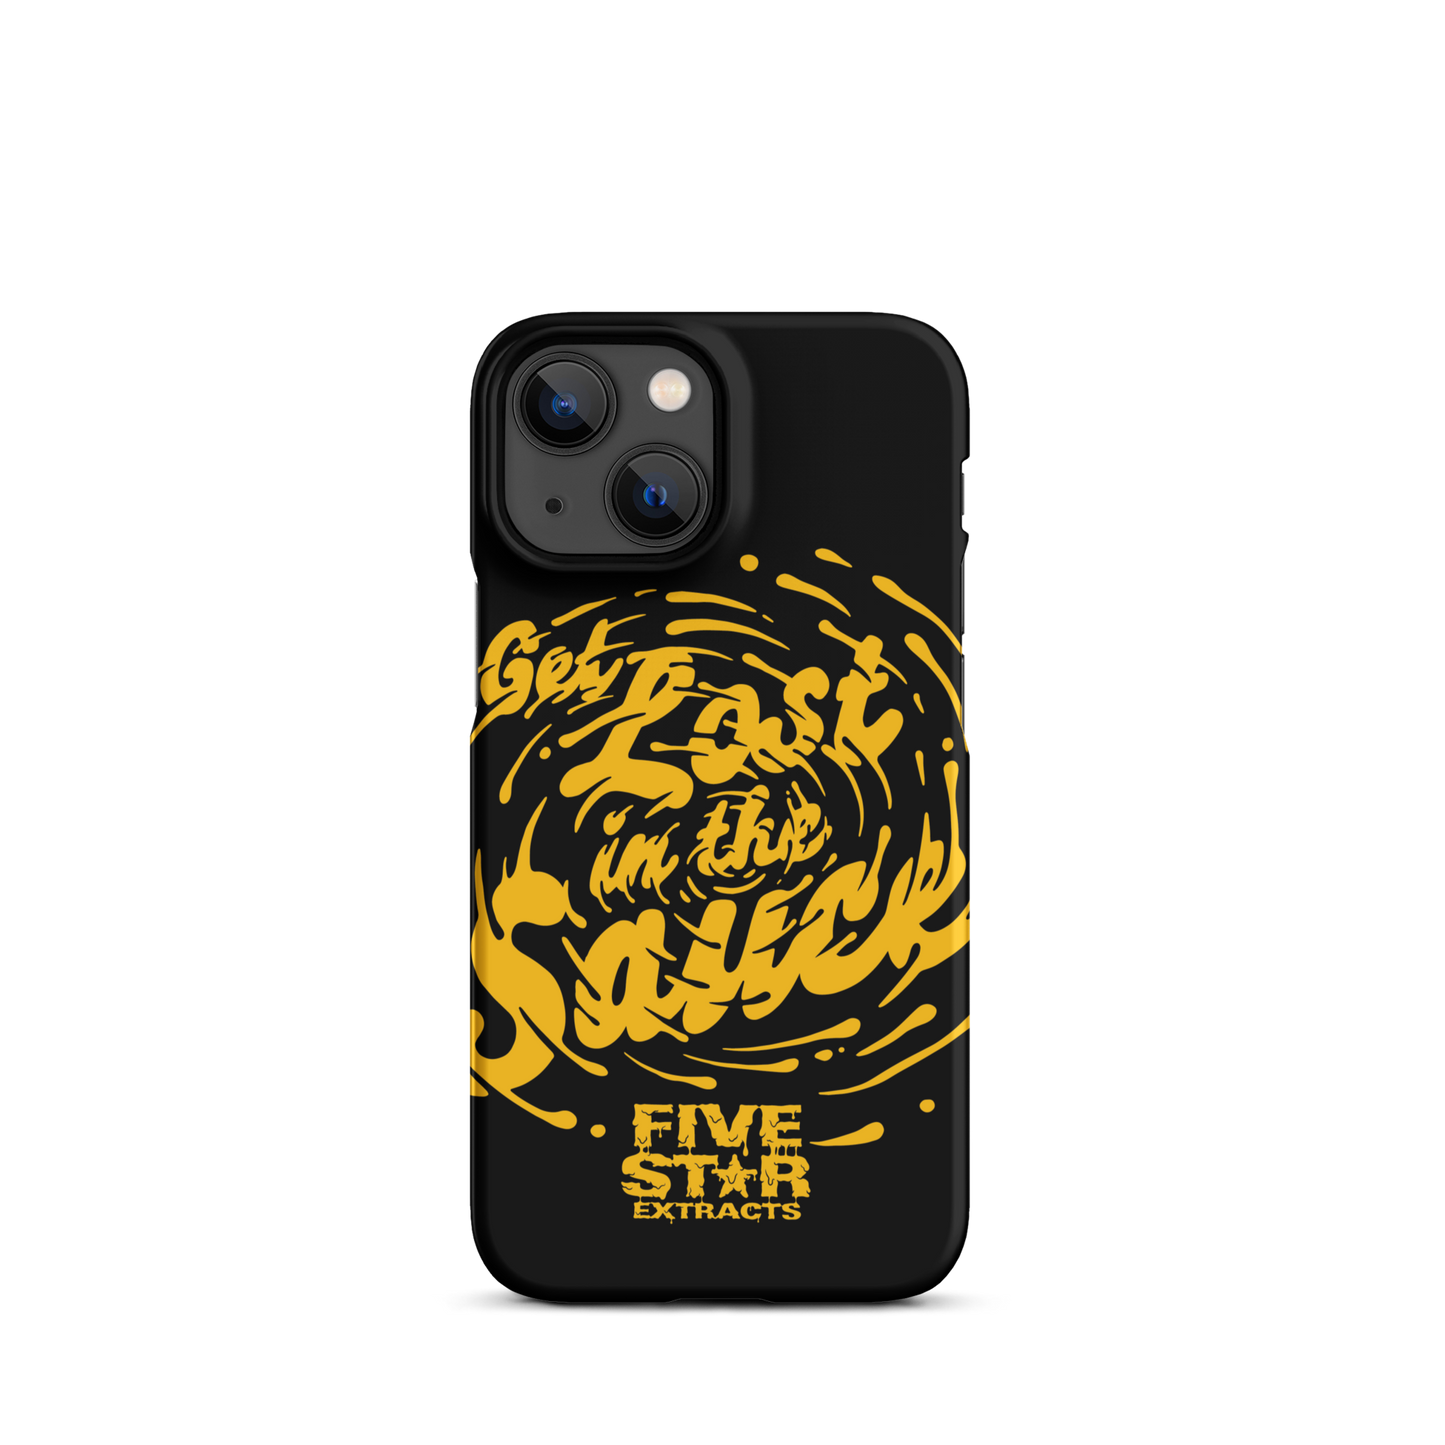 Get Lost in the Sauce Snap case for iPhone®